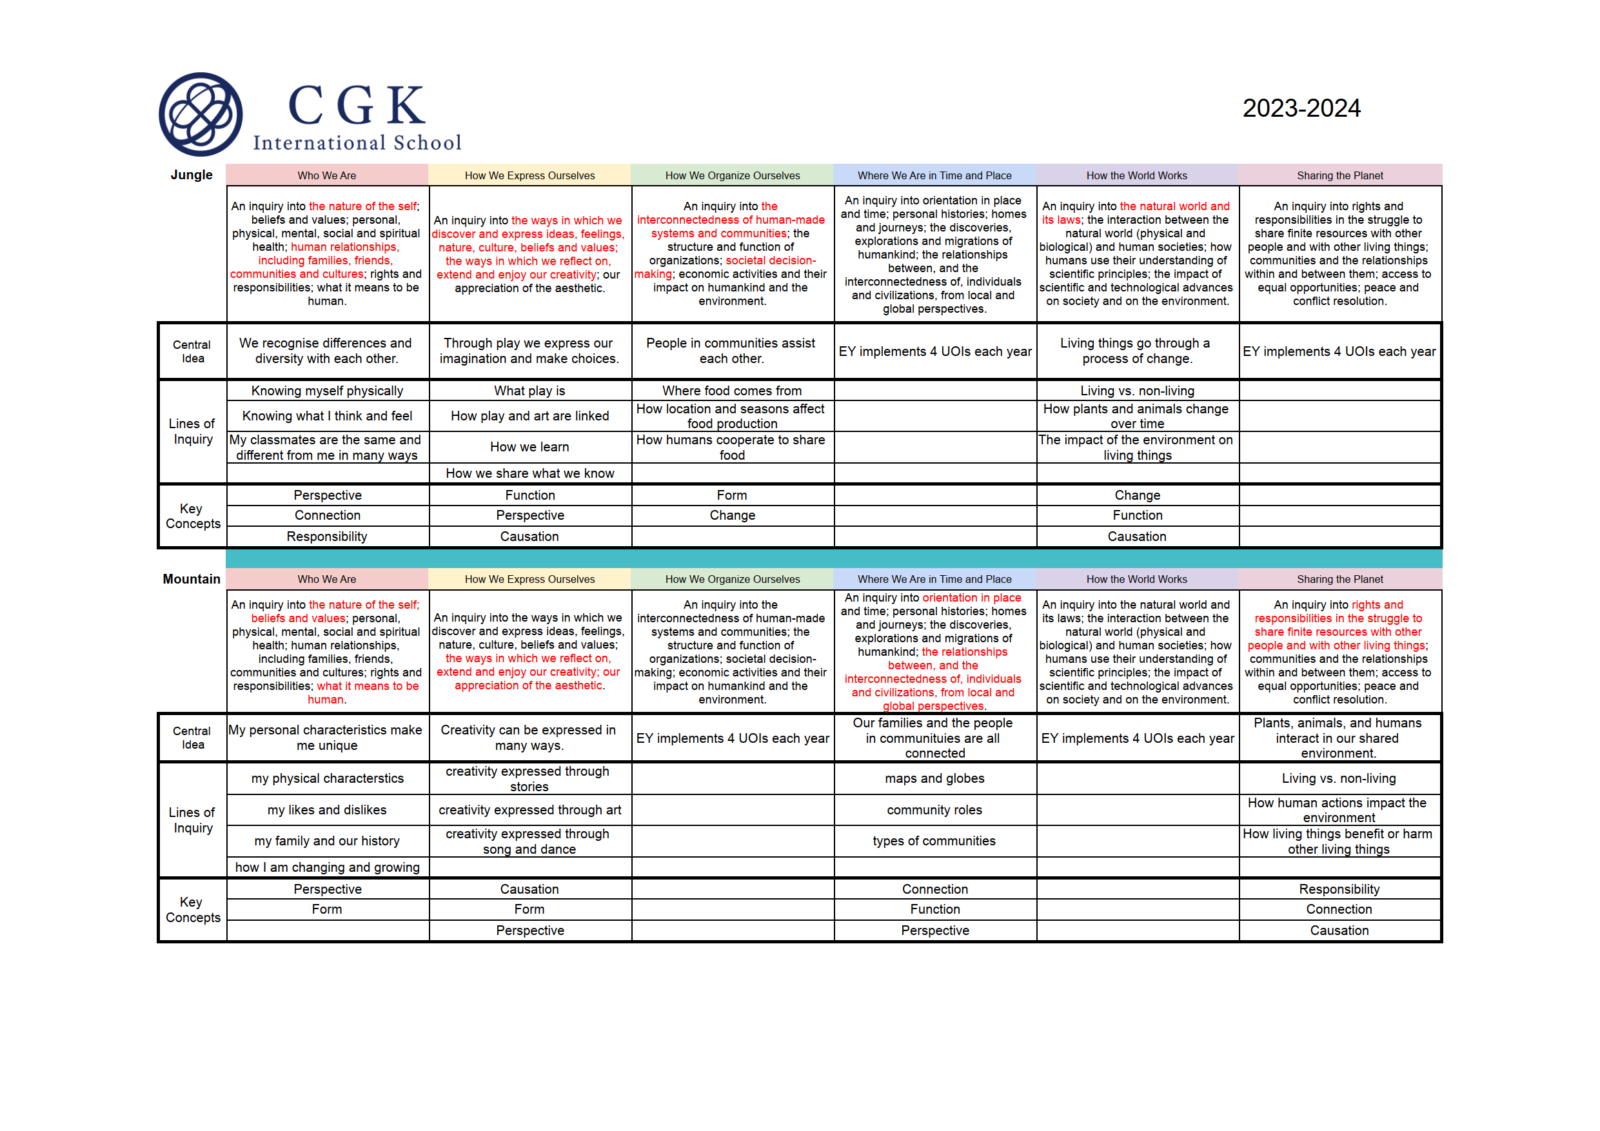 CGK's PYP Programme of Inquiry, 2023-2024